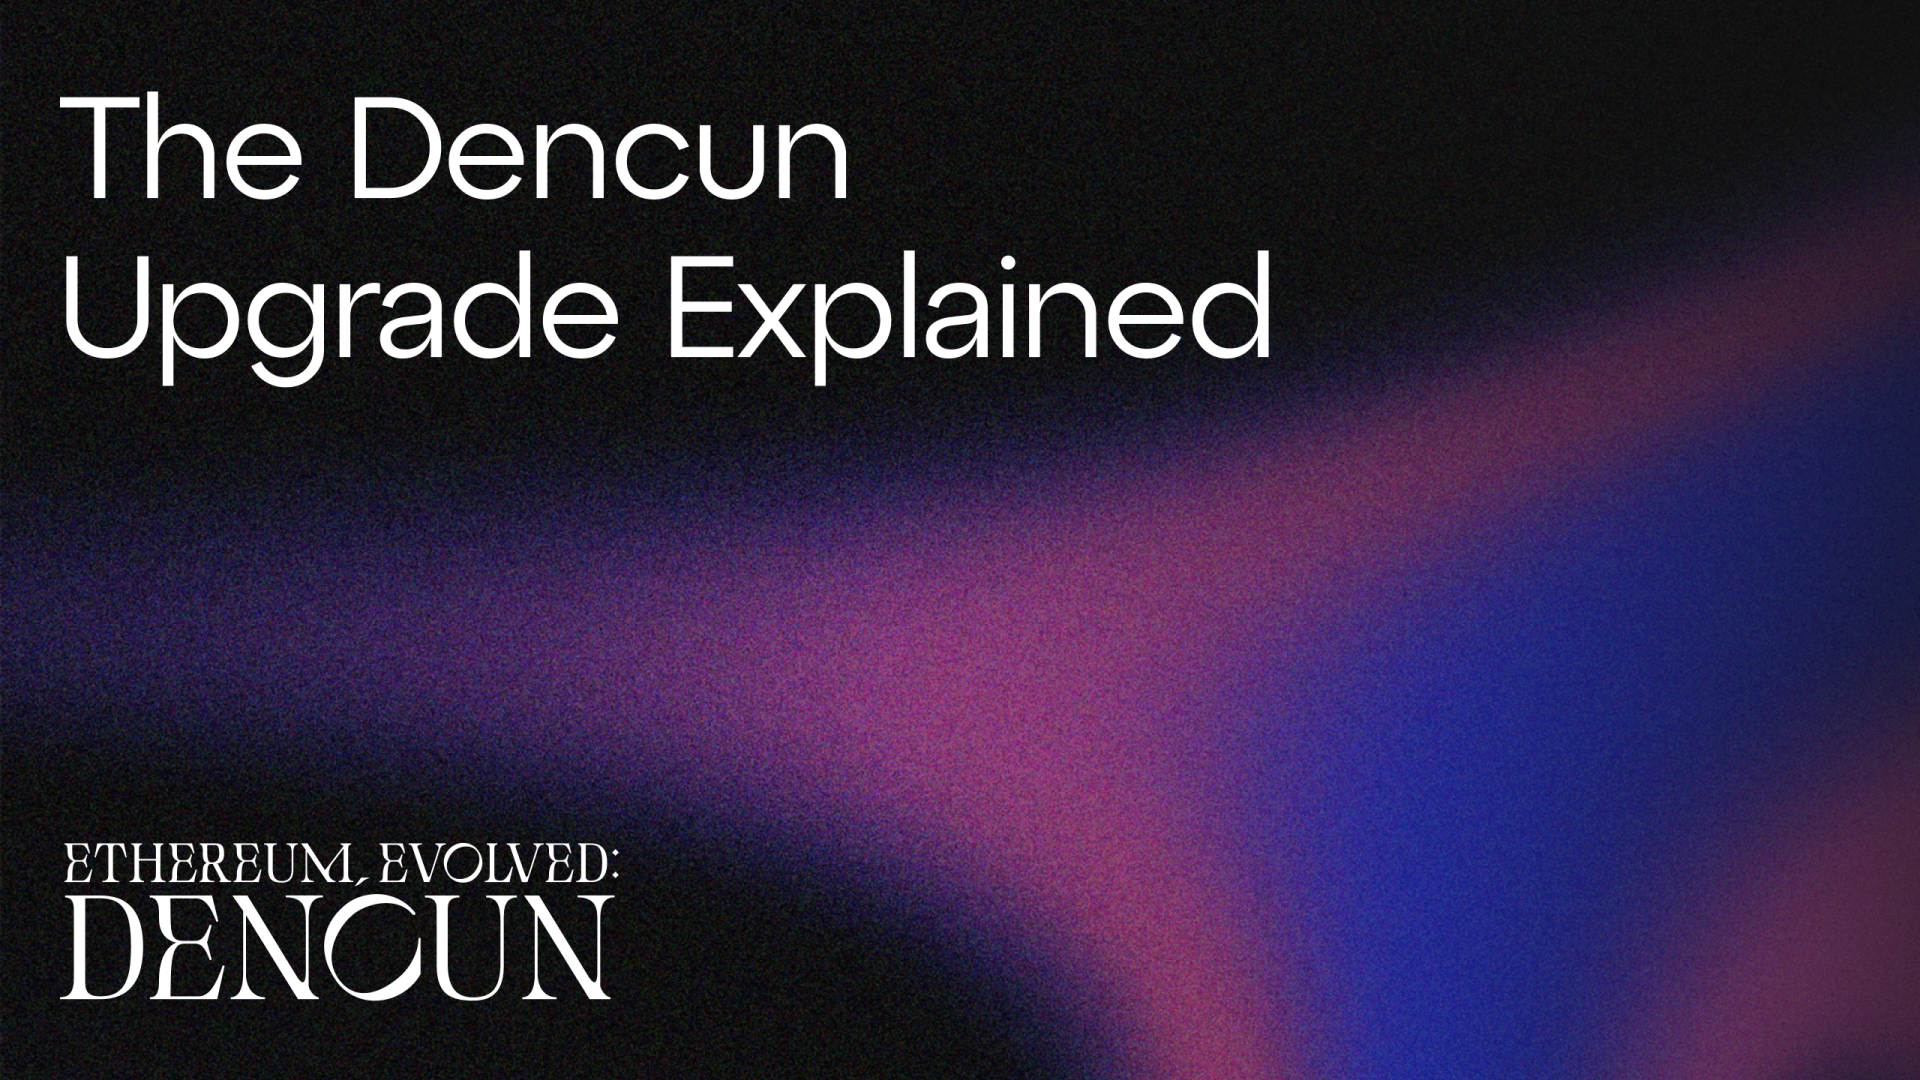 The Dencun Upgrade Explained